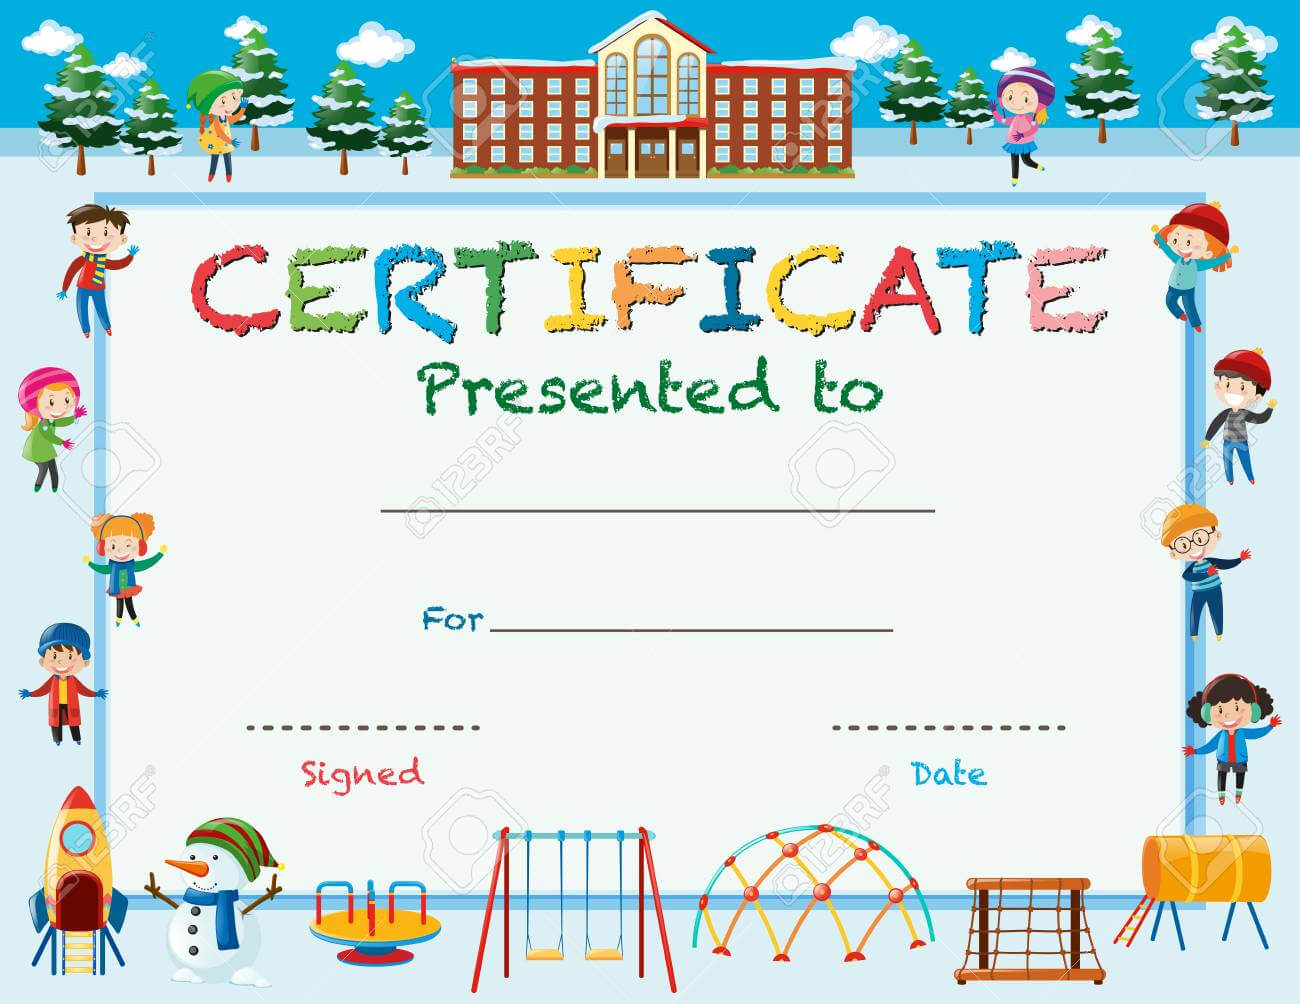 Certificate Template With Kids In Winter At School Illustration With Free School Certificate Templates